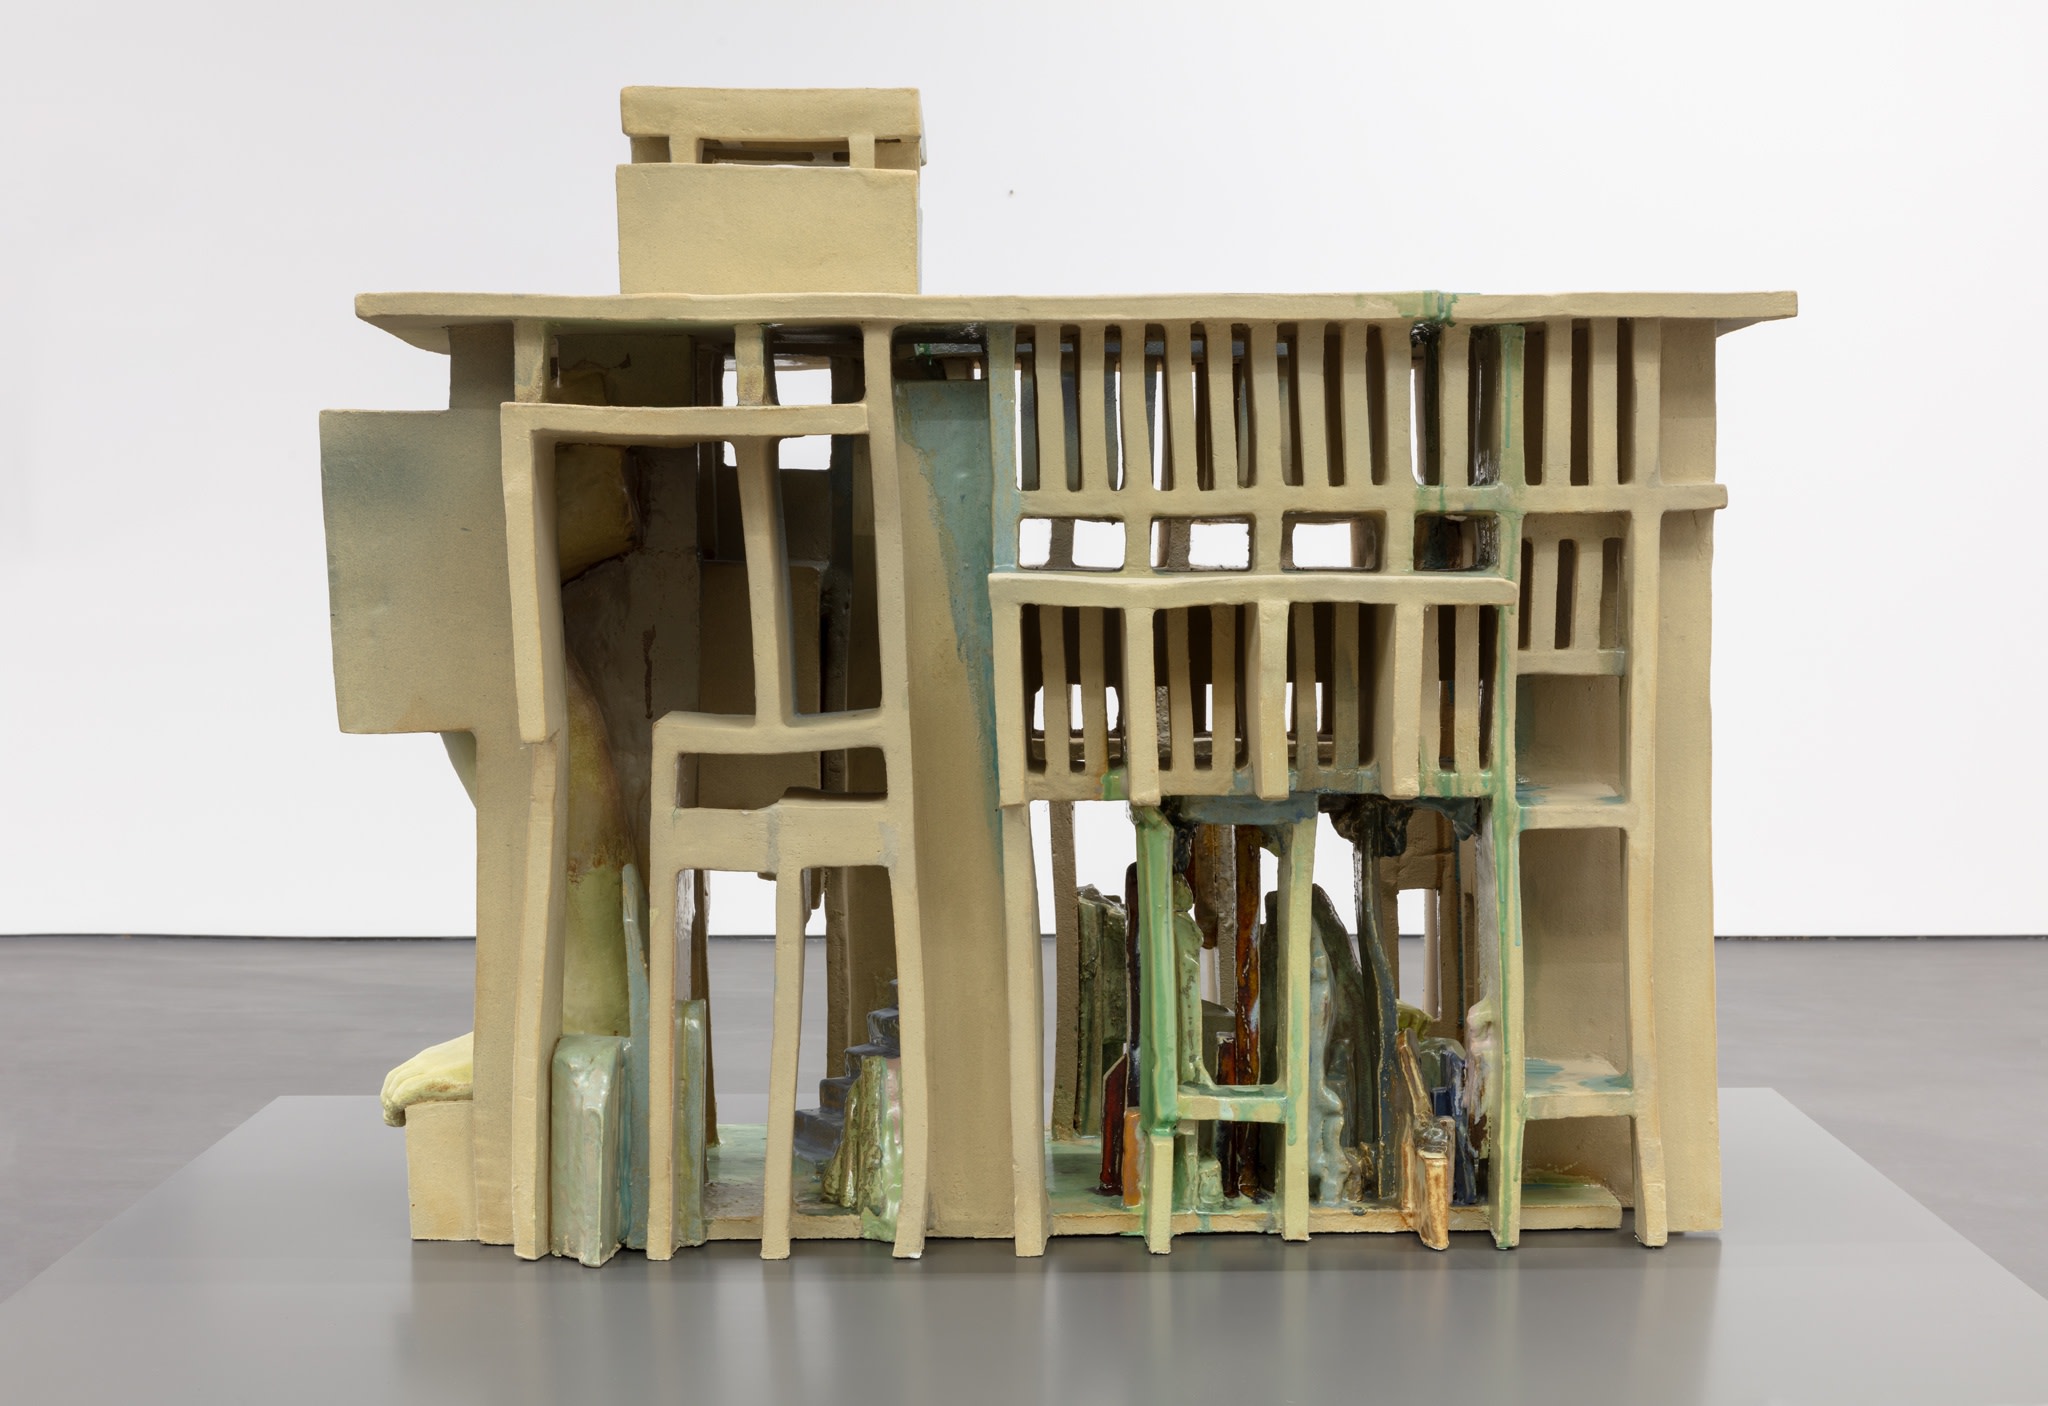 Isa Melsheimer, false ruins and lost innocence 2, 2020, ceramic, plinth, 96 x 78 x 120 cm (37 3/4 x 30 3/4 x 47 1/4 in) (work), 50 x 190 x 160 cm (19 3/4 x 74 3/4 x 63 in) (plinth). Photo © Andrea Rossetti